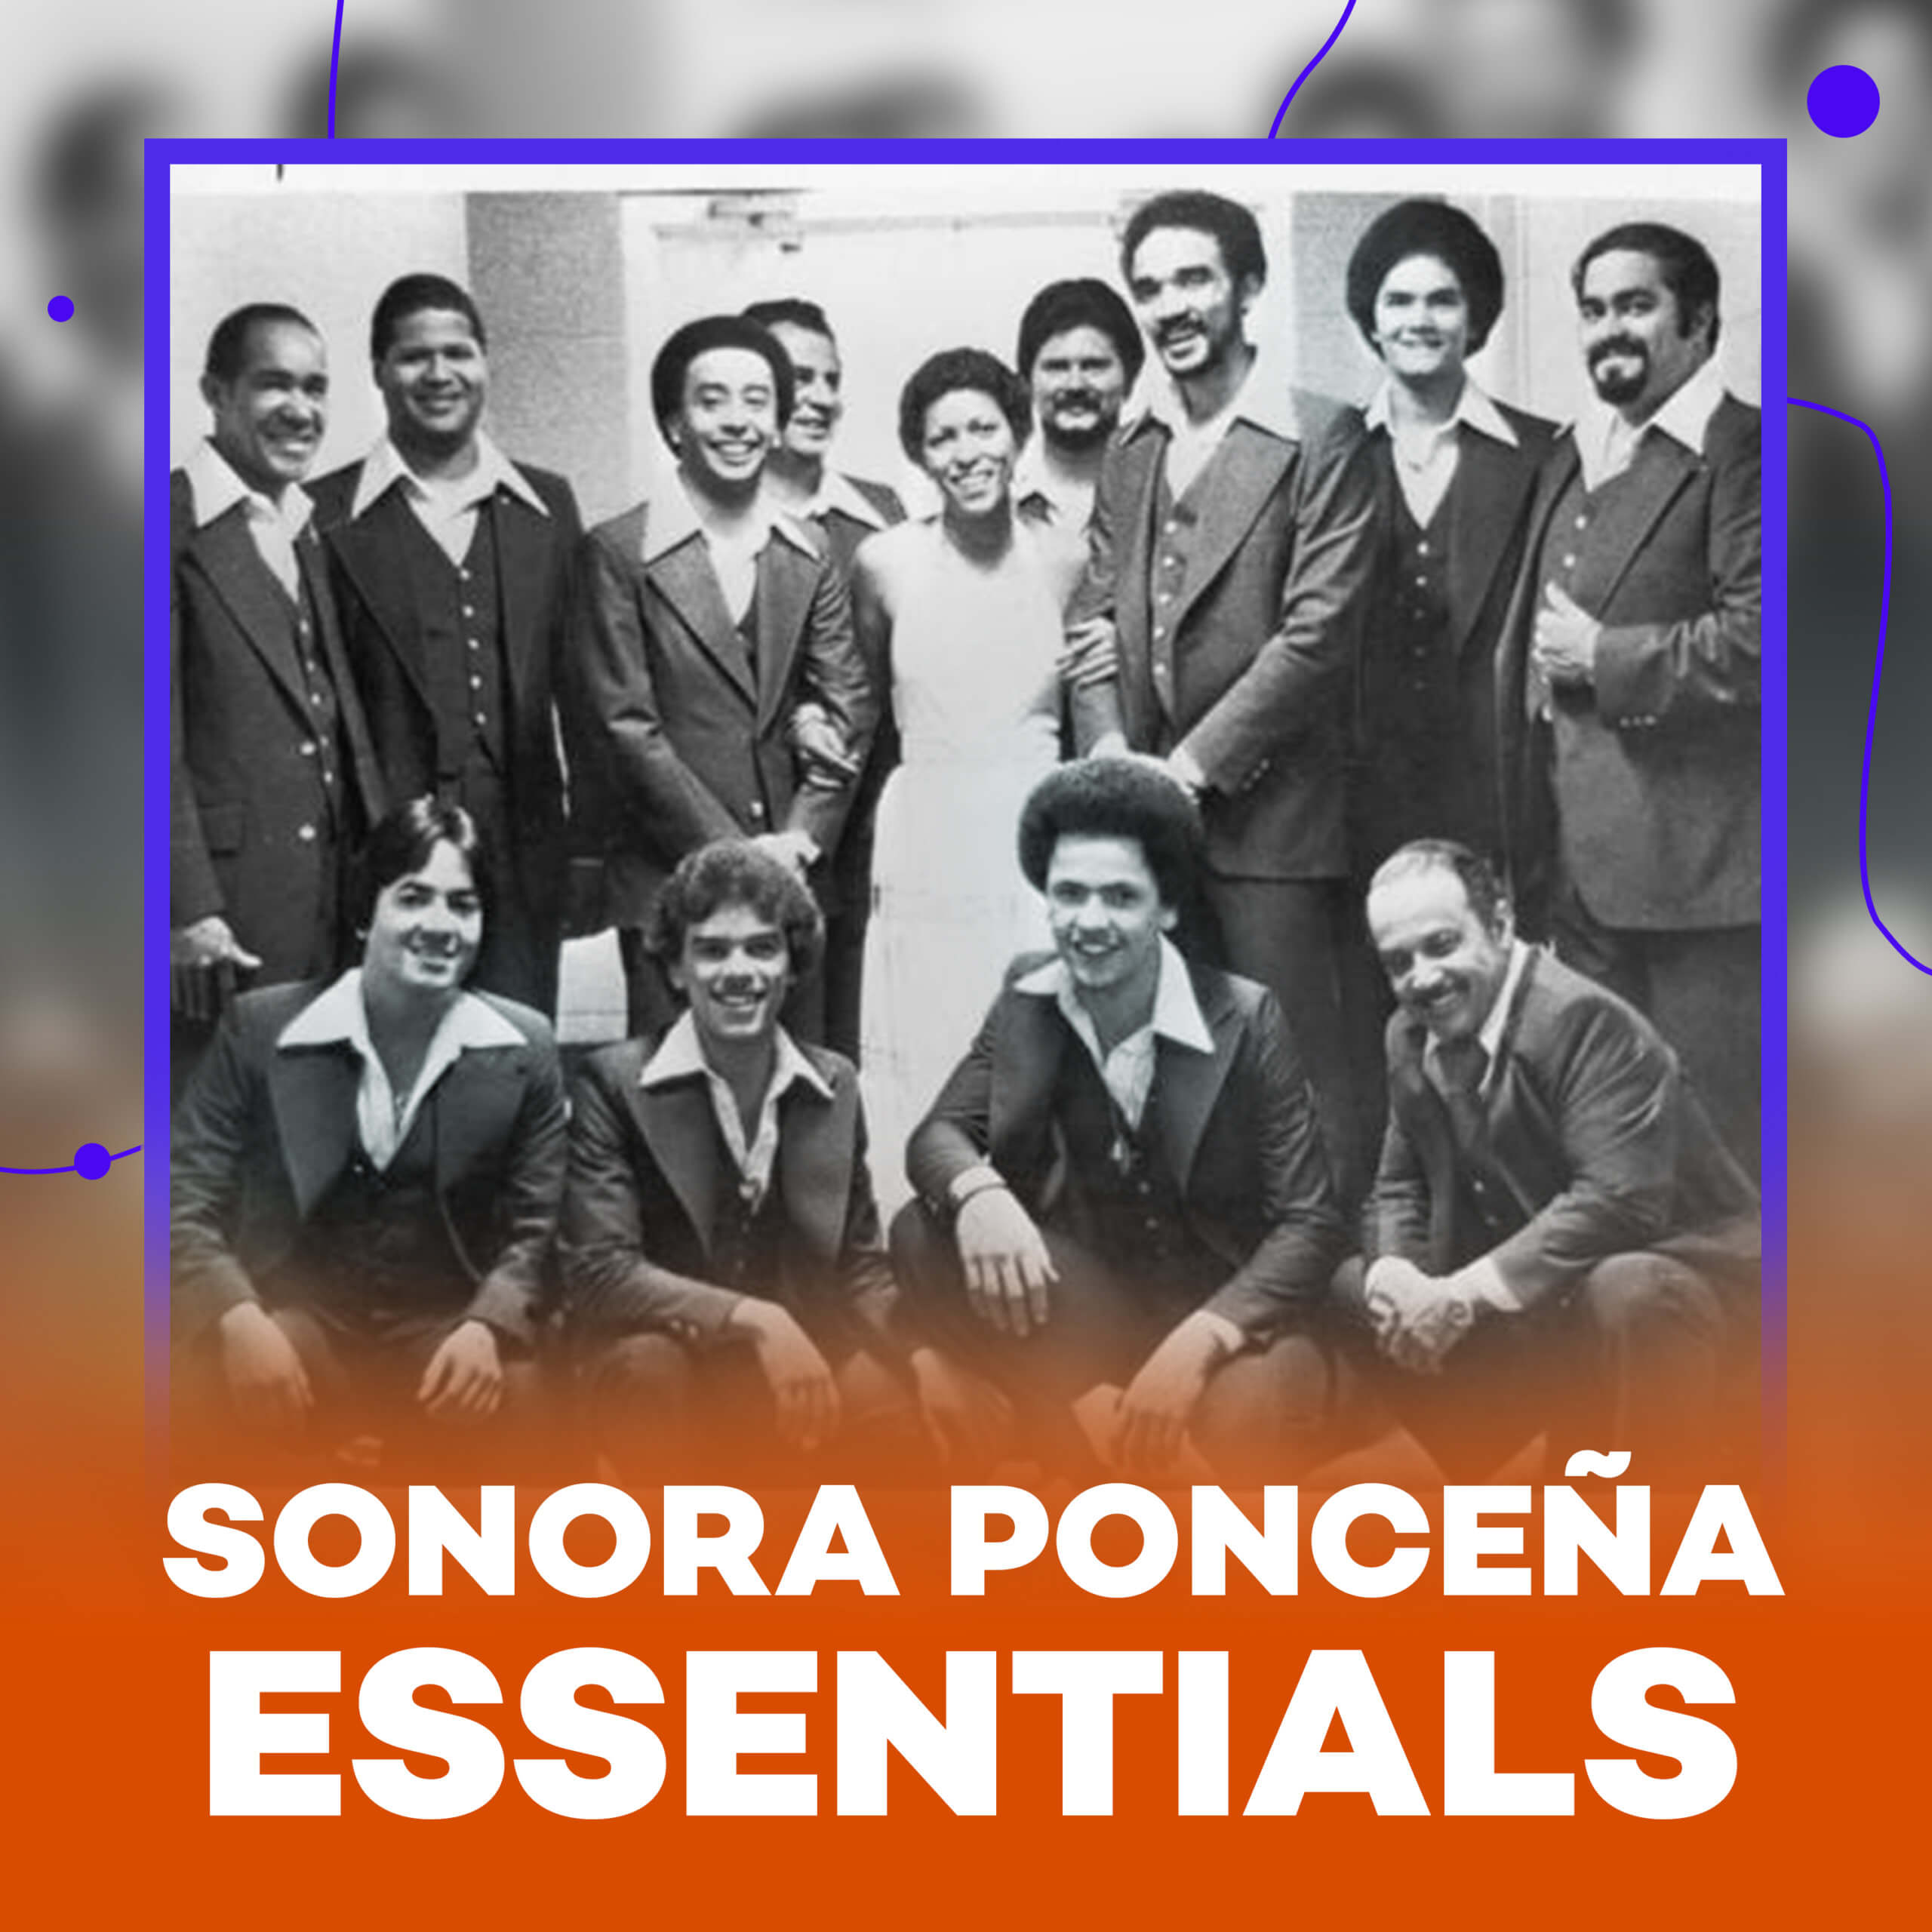 Featured image for “Sonora Ponceña”